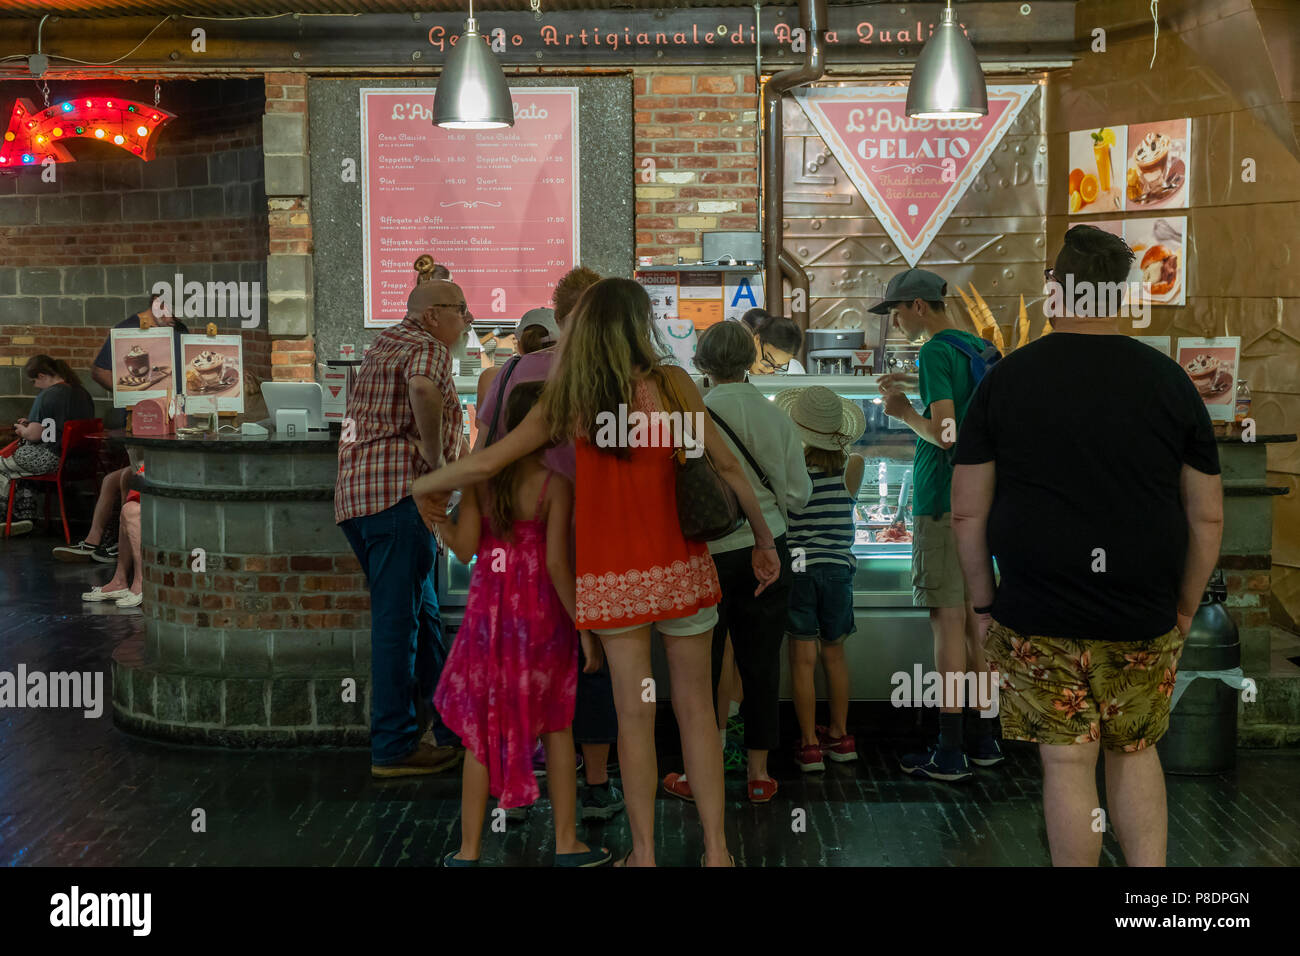 Visitors to Chelsea Market in New York stay indoors and beat the heat wave at the L'Arte del Gelato kiosk on Tuesday, July 3, 2018. The National Weather Service has issued a hot weather advisory until Wednesday evening citing the oppressive heat and humidity. (Â© Richard  B. Levine) Stock Photo